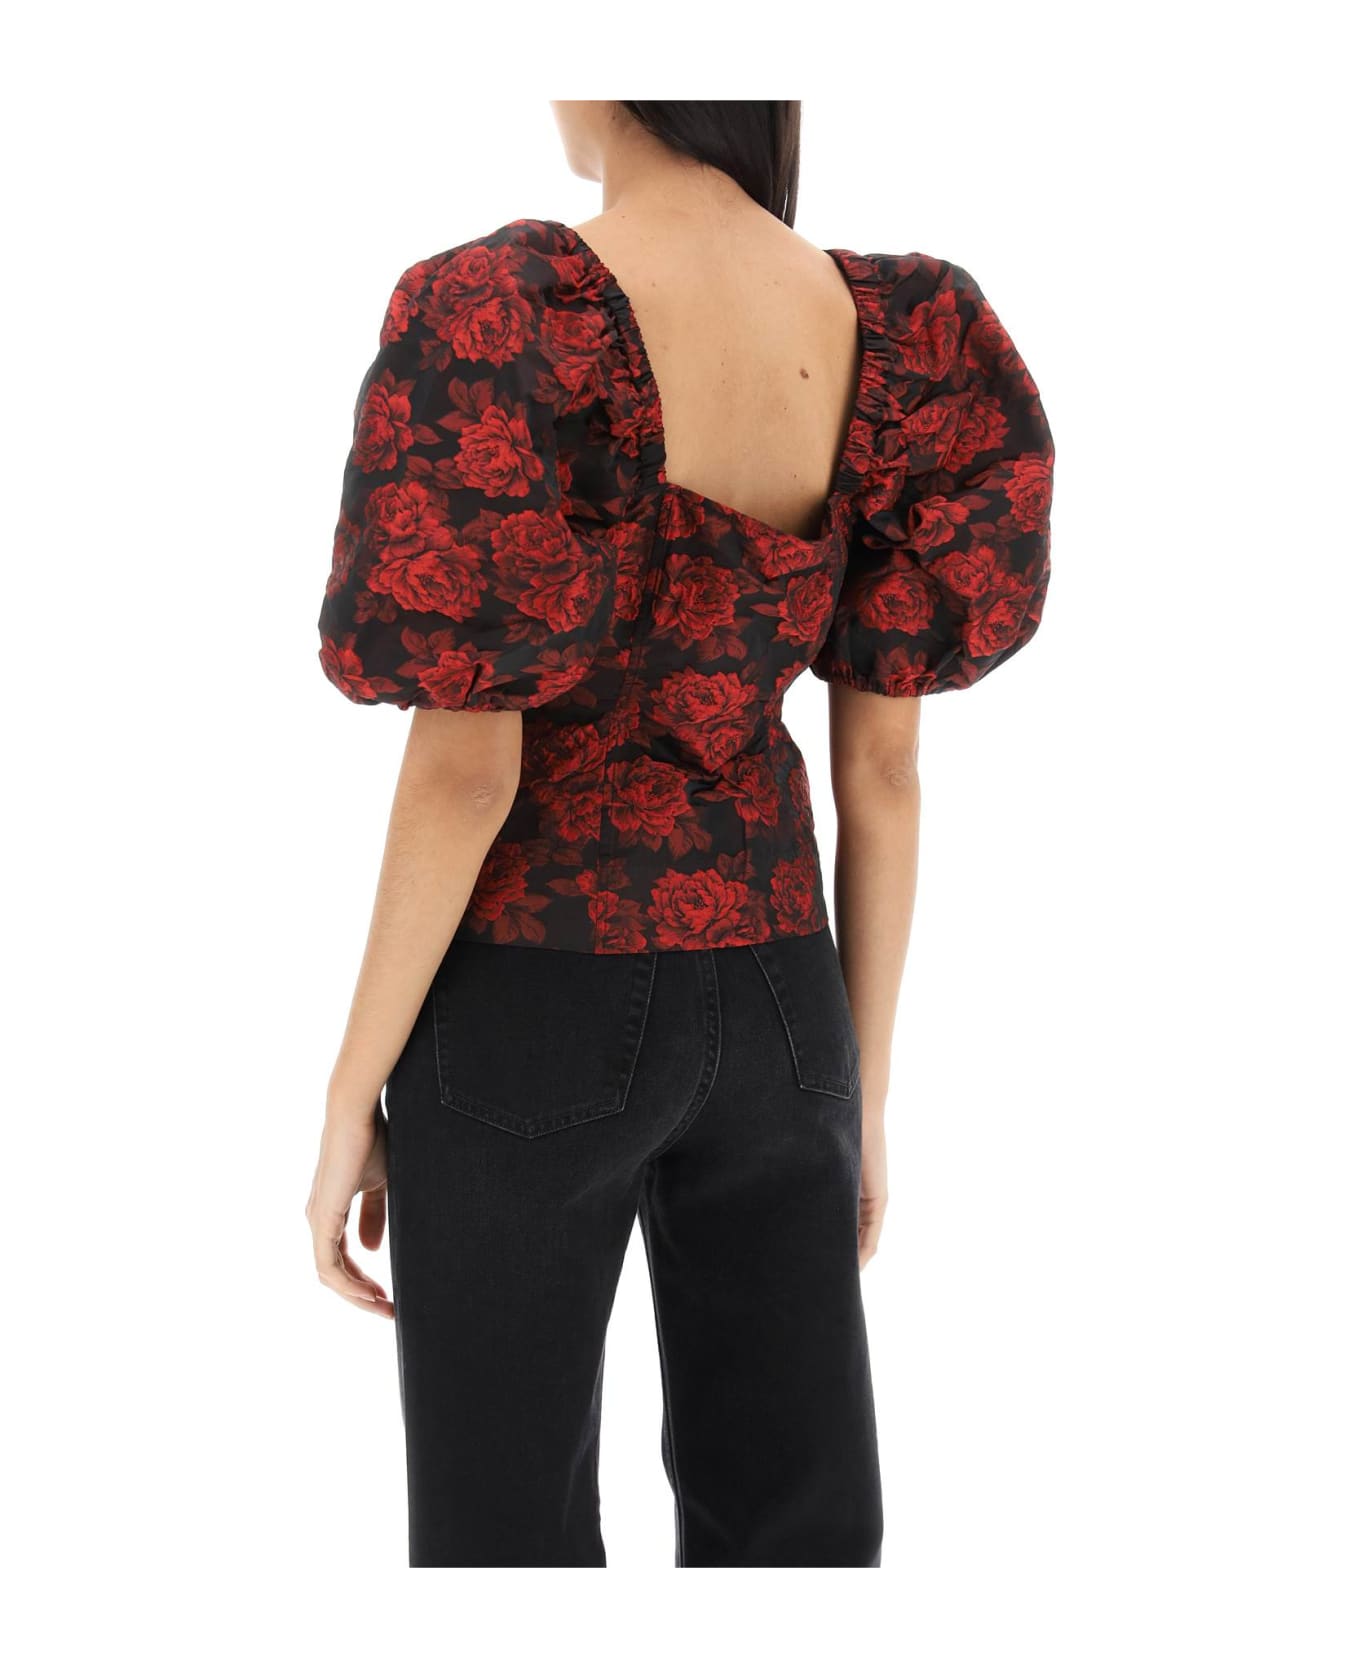 Ganni Blouse In Floral Jacquard - HIGH RISK RED (Red)